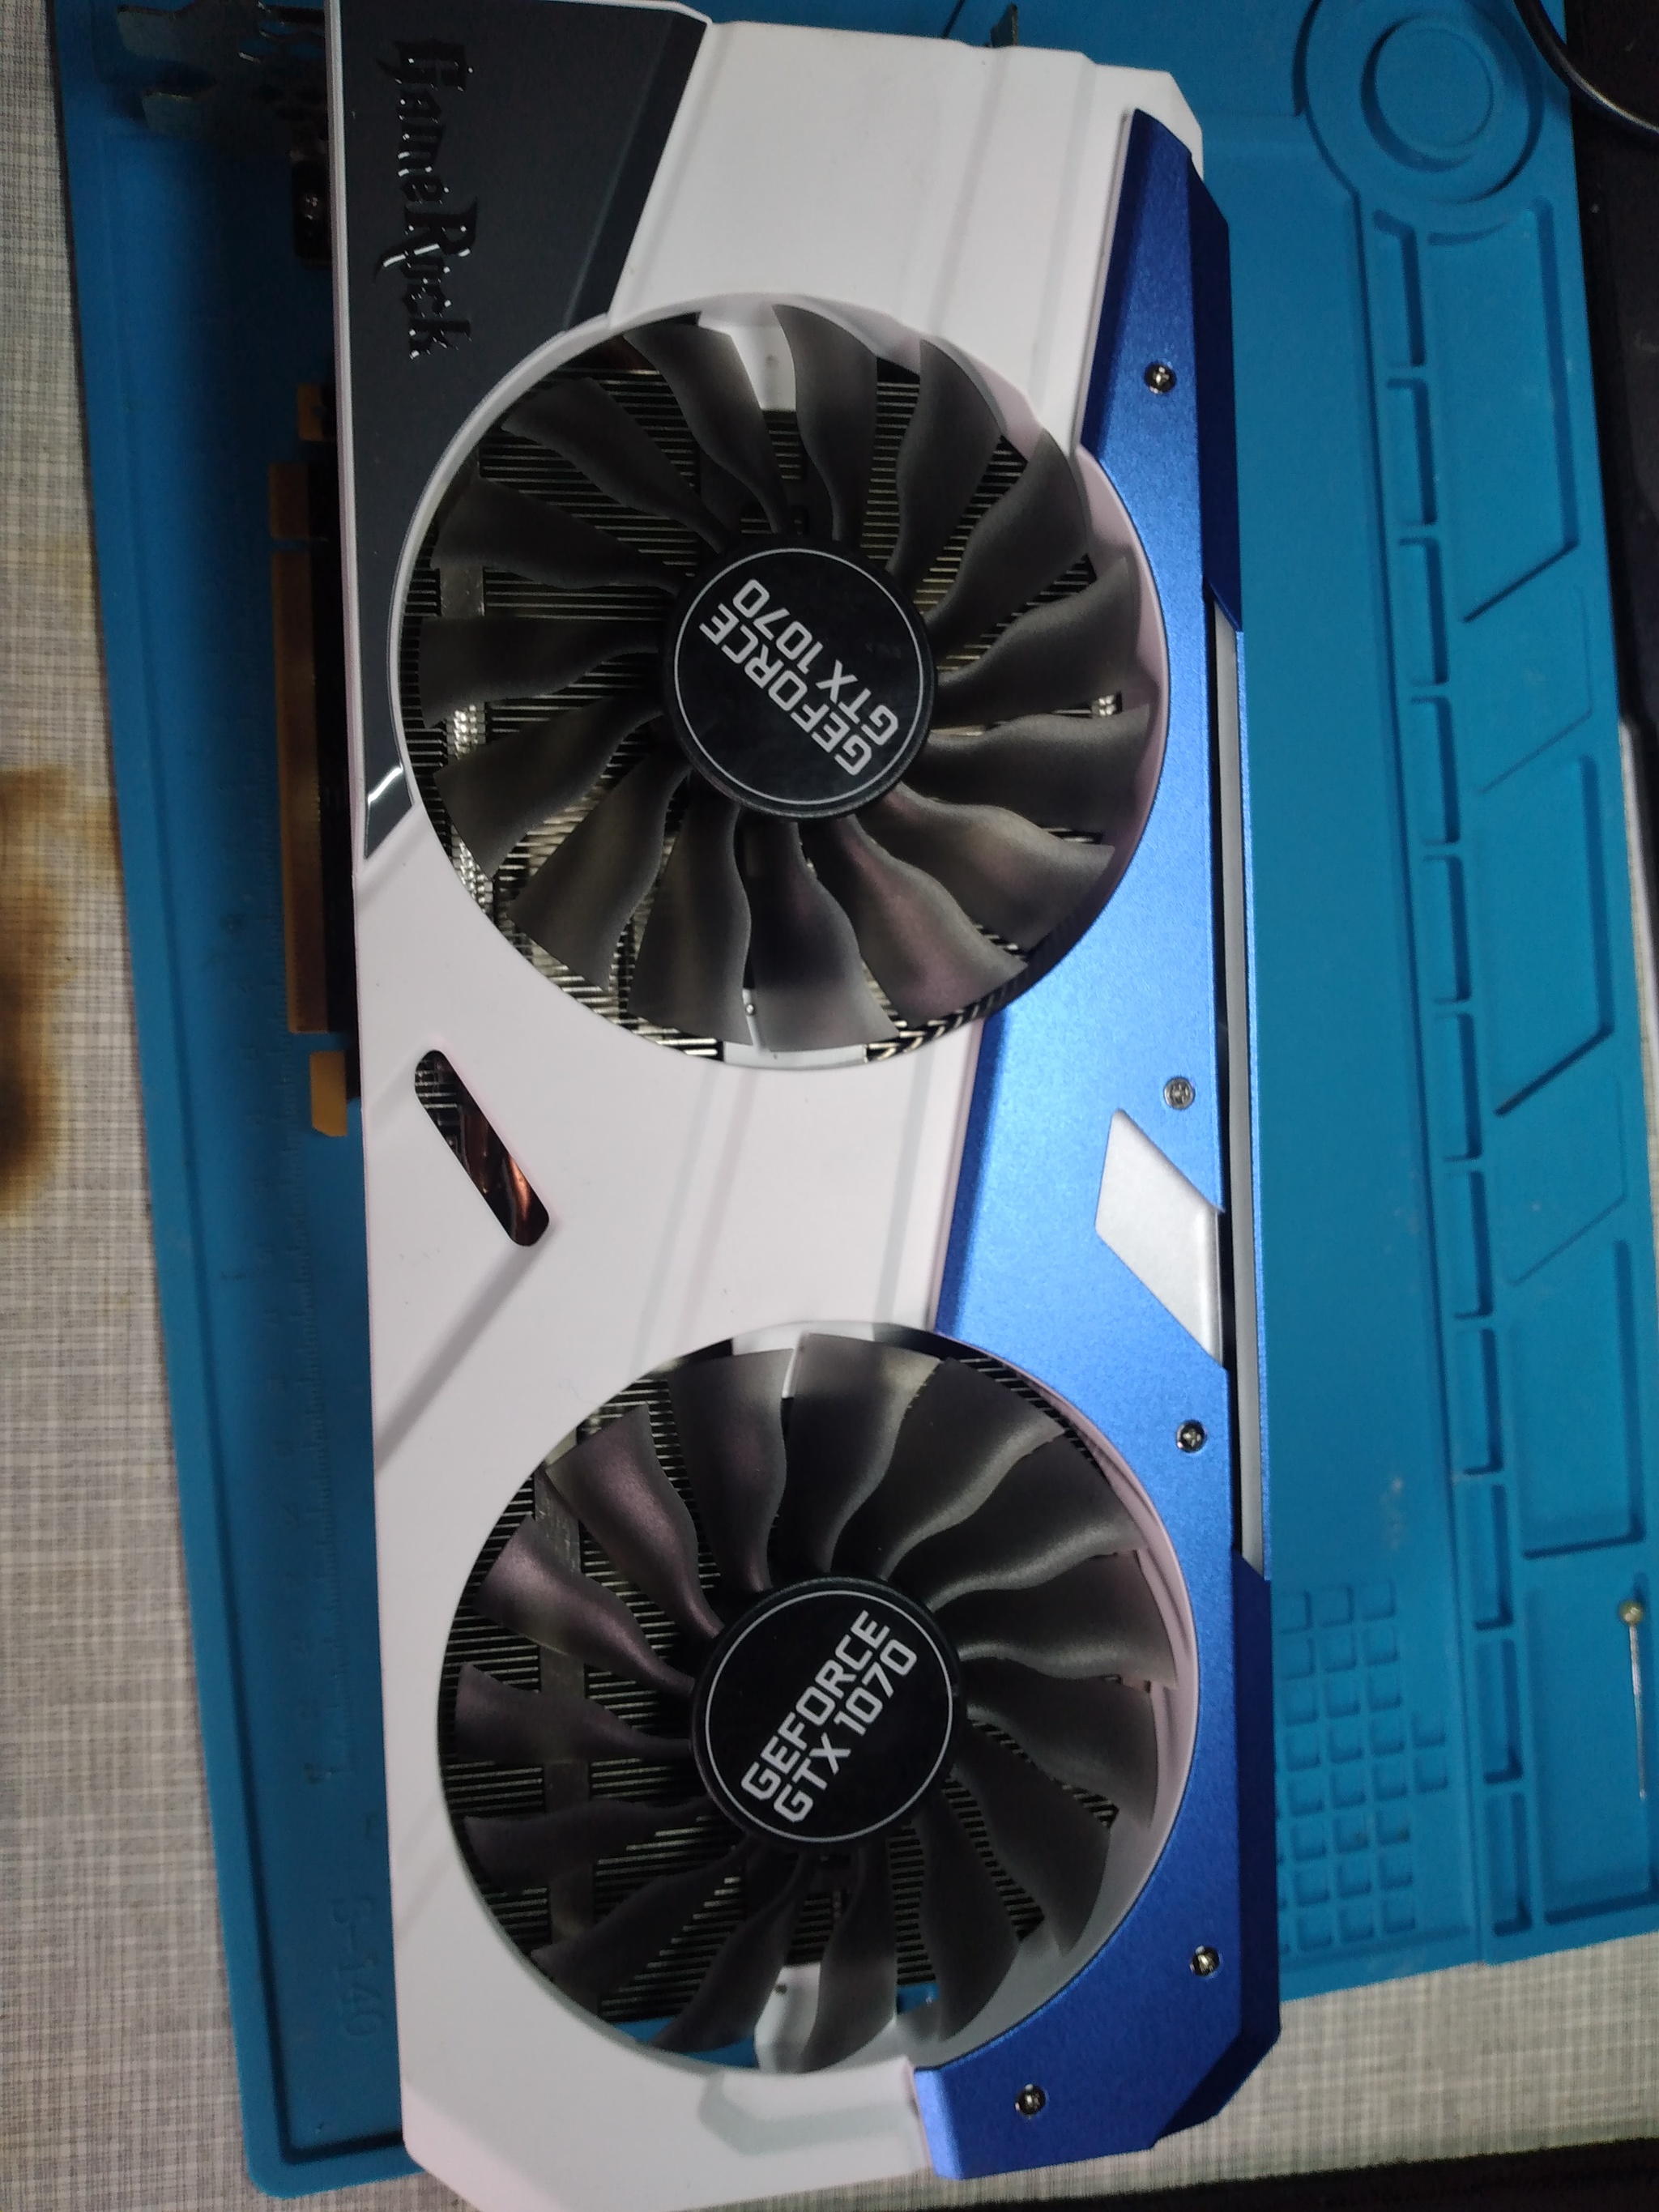 Palit GTX 1070 Game Rock is an interesting case) - My, Repairers Community, Video card, Video, Longpost